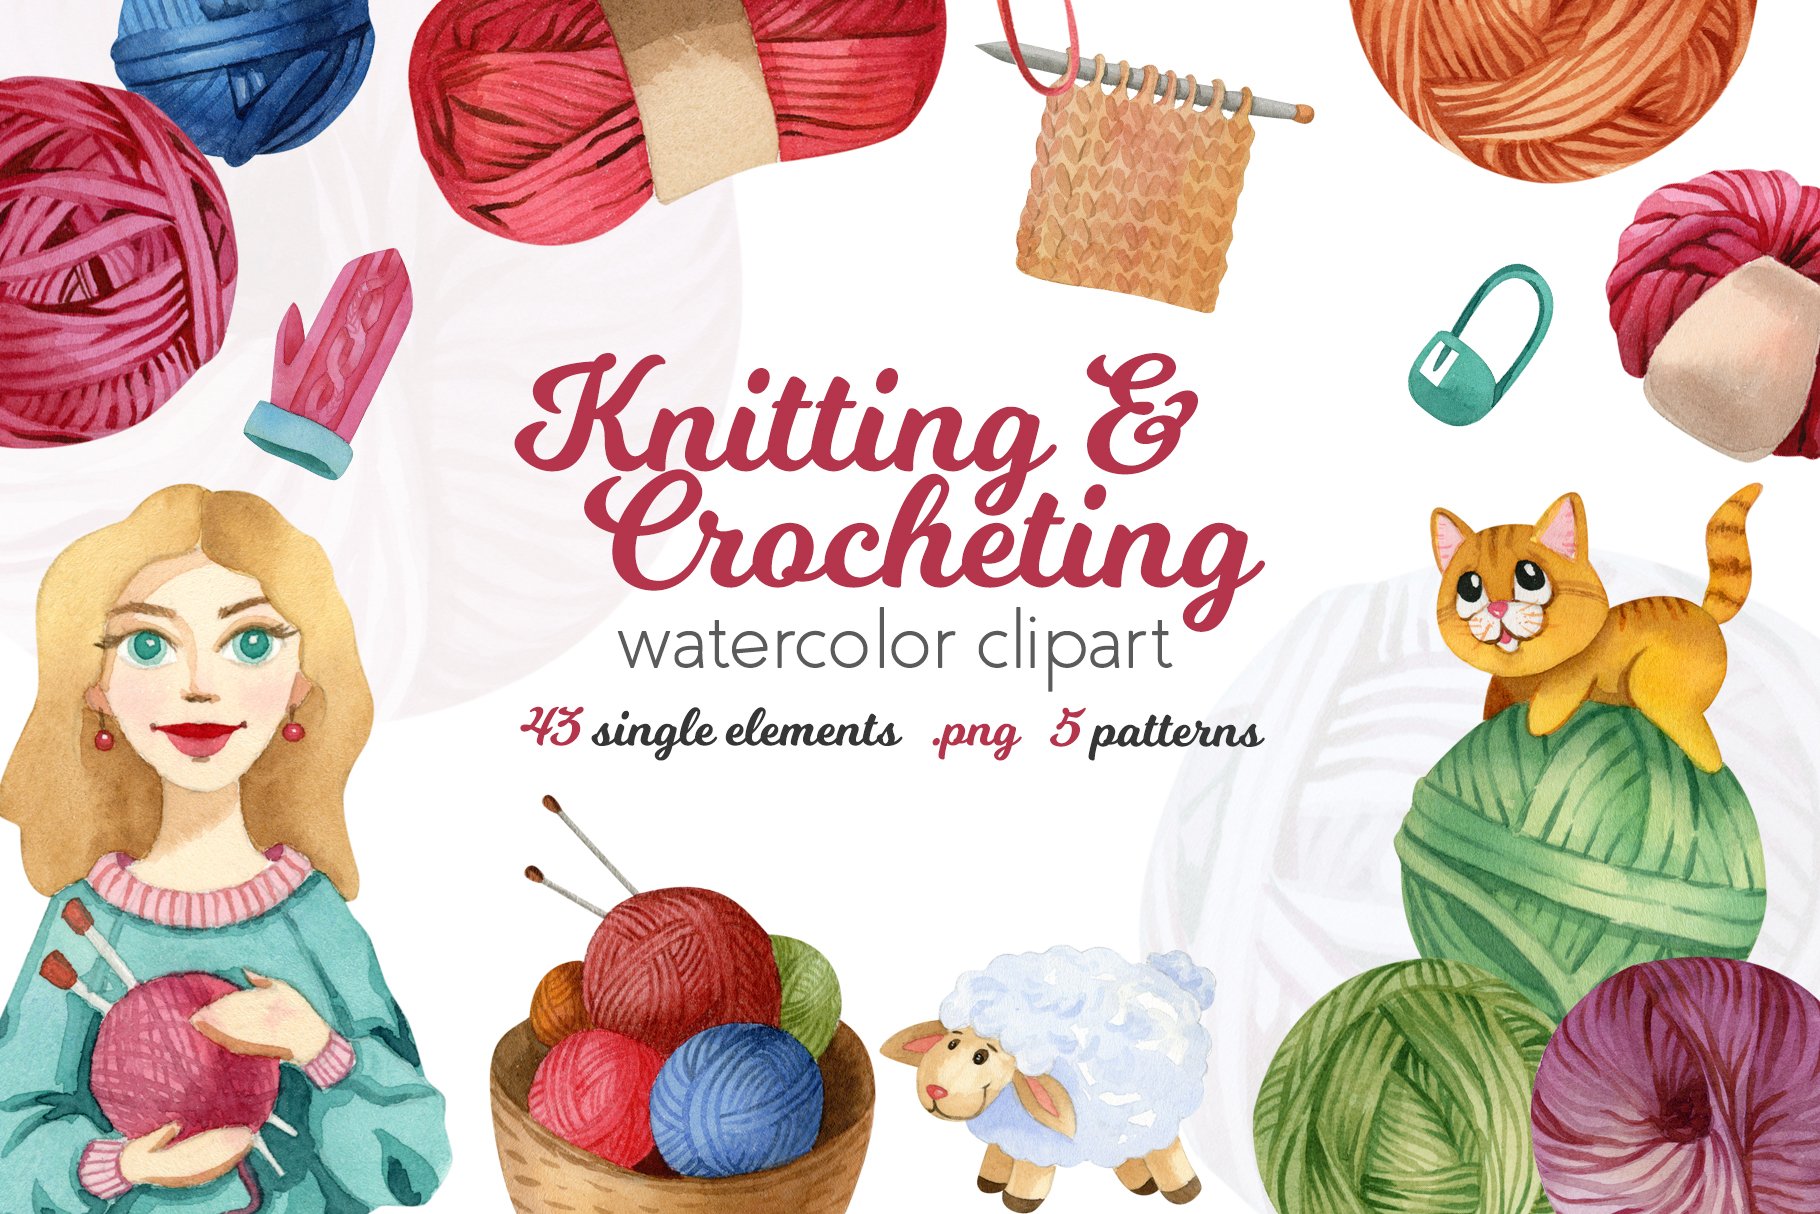 Watercolor Knitting and Crocheting cover image.